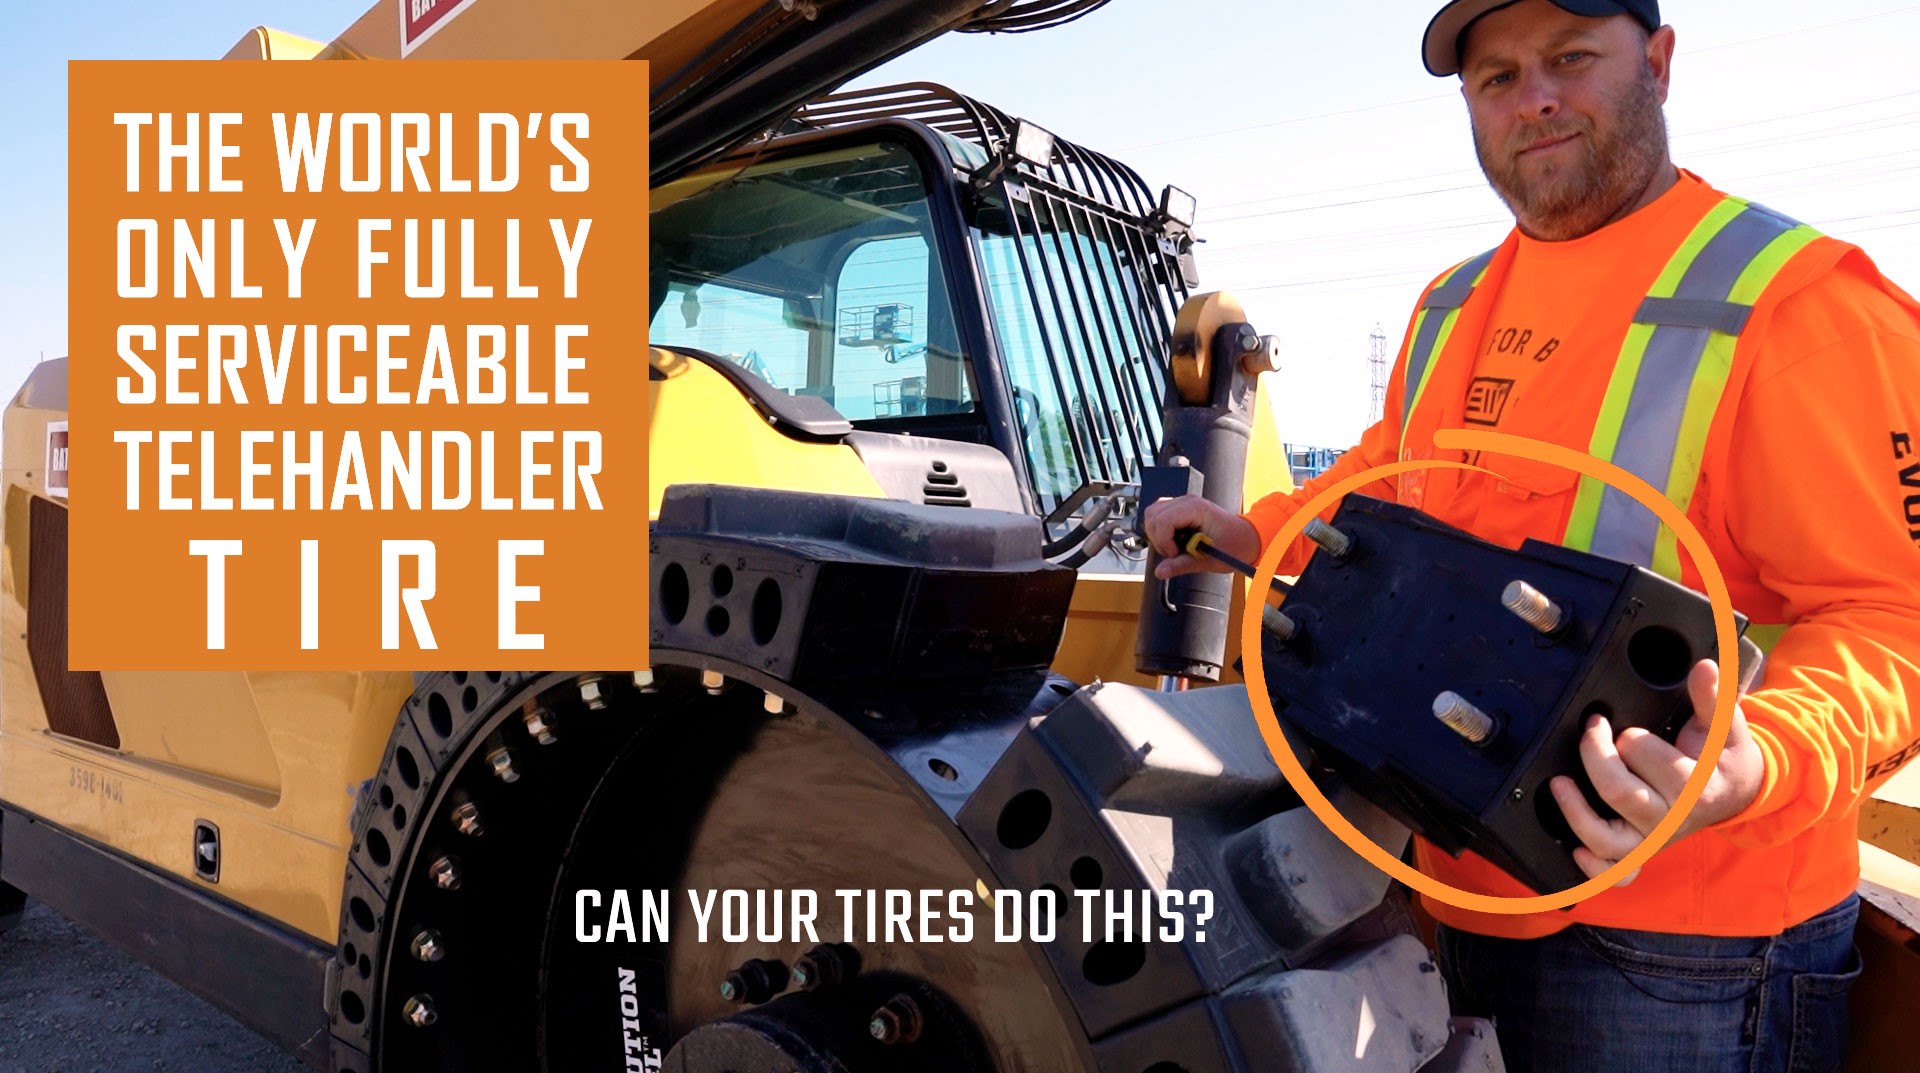 This video is about the world's only fully serviceable Gradall telehandler tires